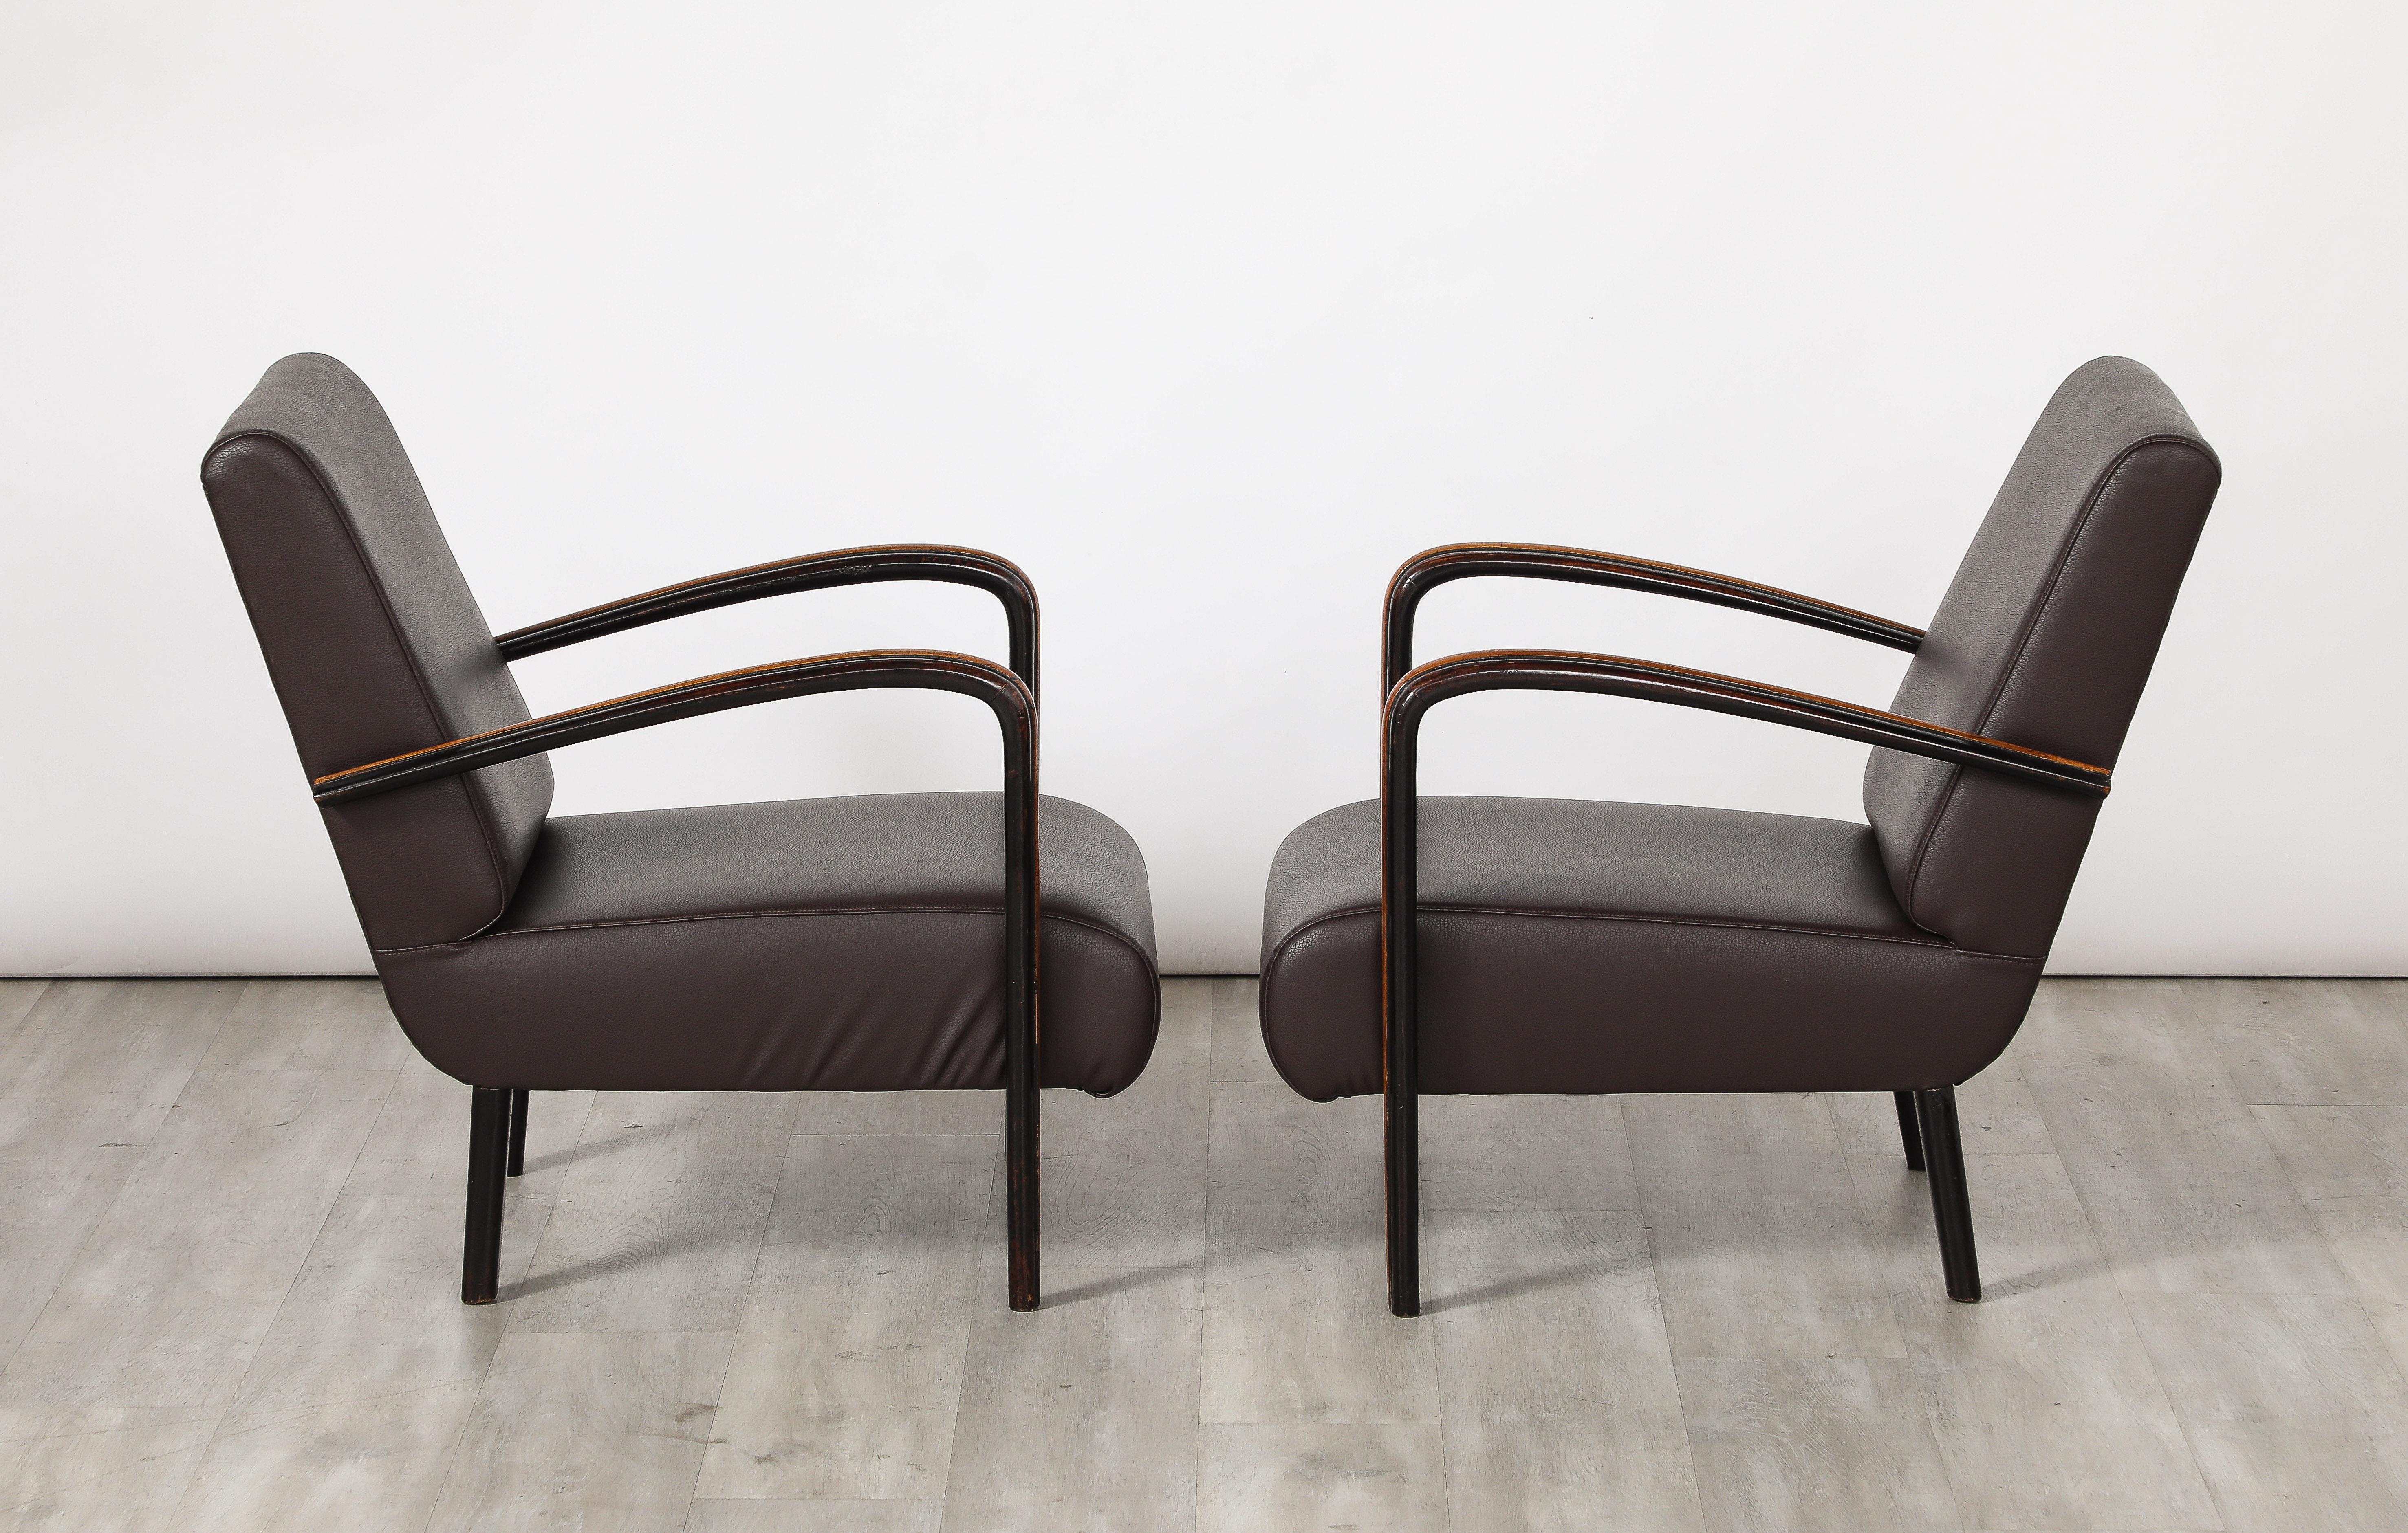 Pair of Italian Modernist Lounge Chairs, Italy, circa 1940 For Sale 5